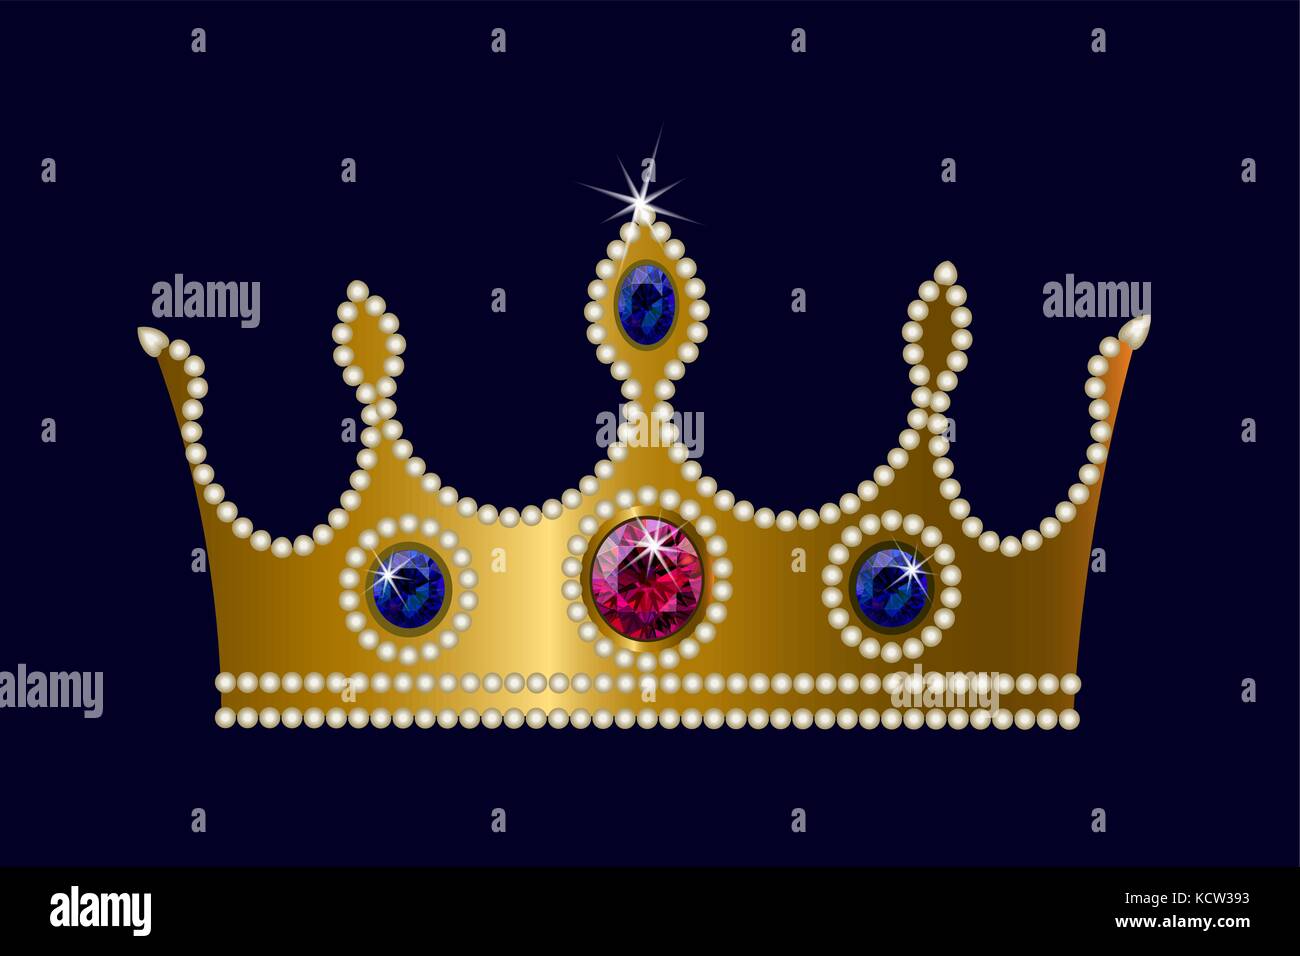 Gold crown on dark background ruby sapphire pearls. Vector illustration Stock Vector